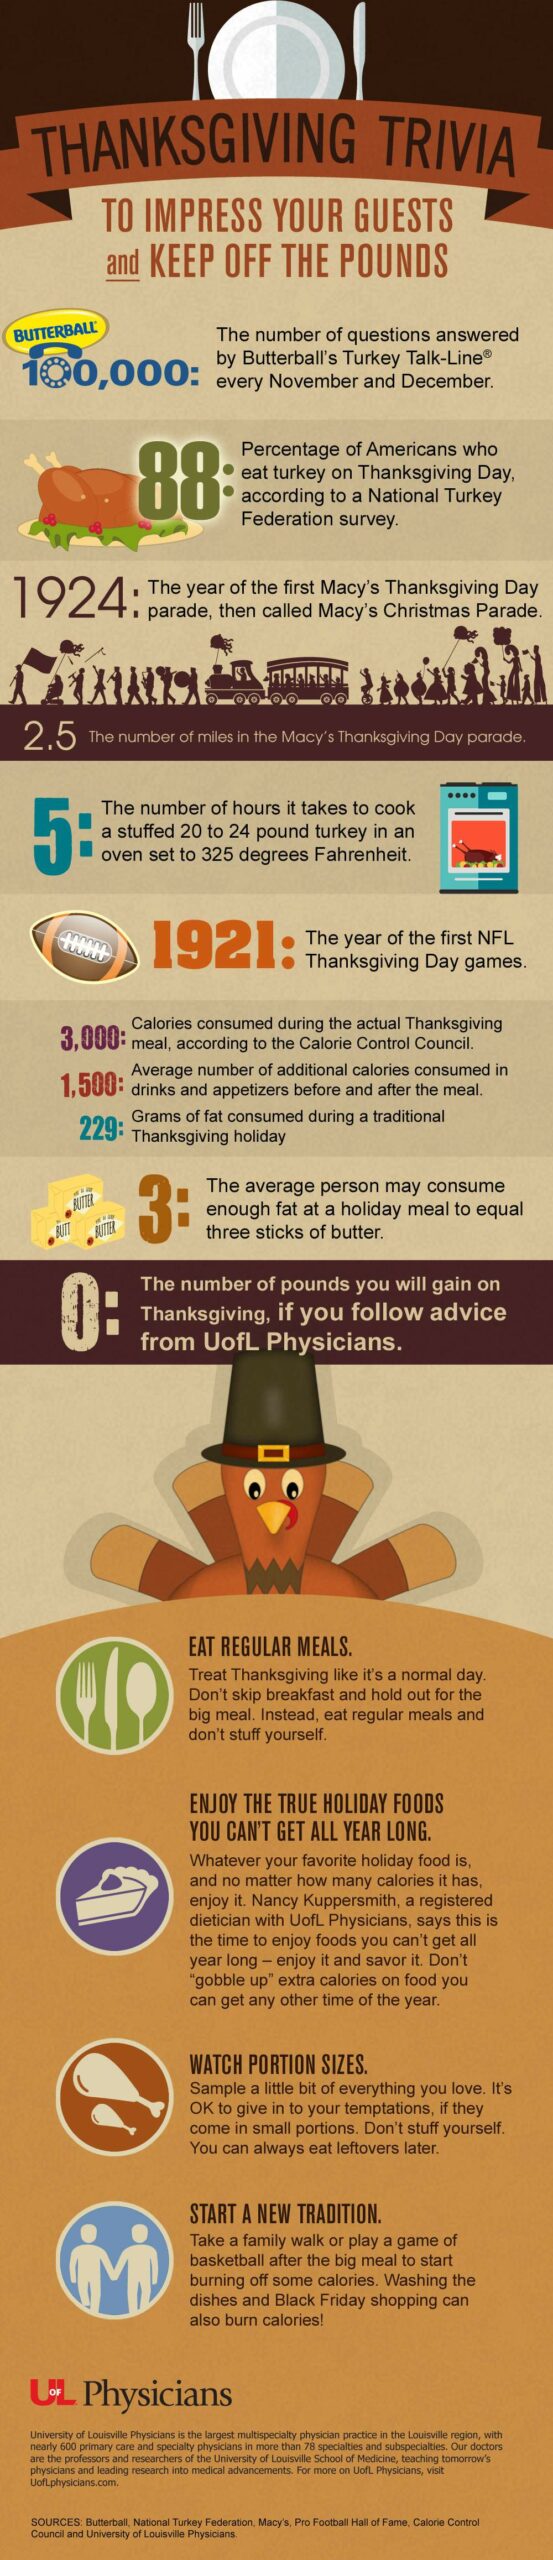 Thanksgiving infographic